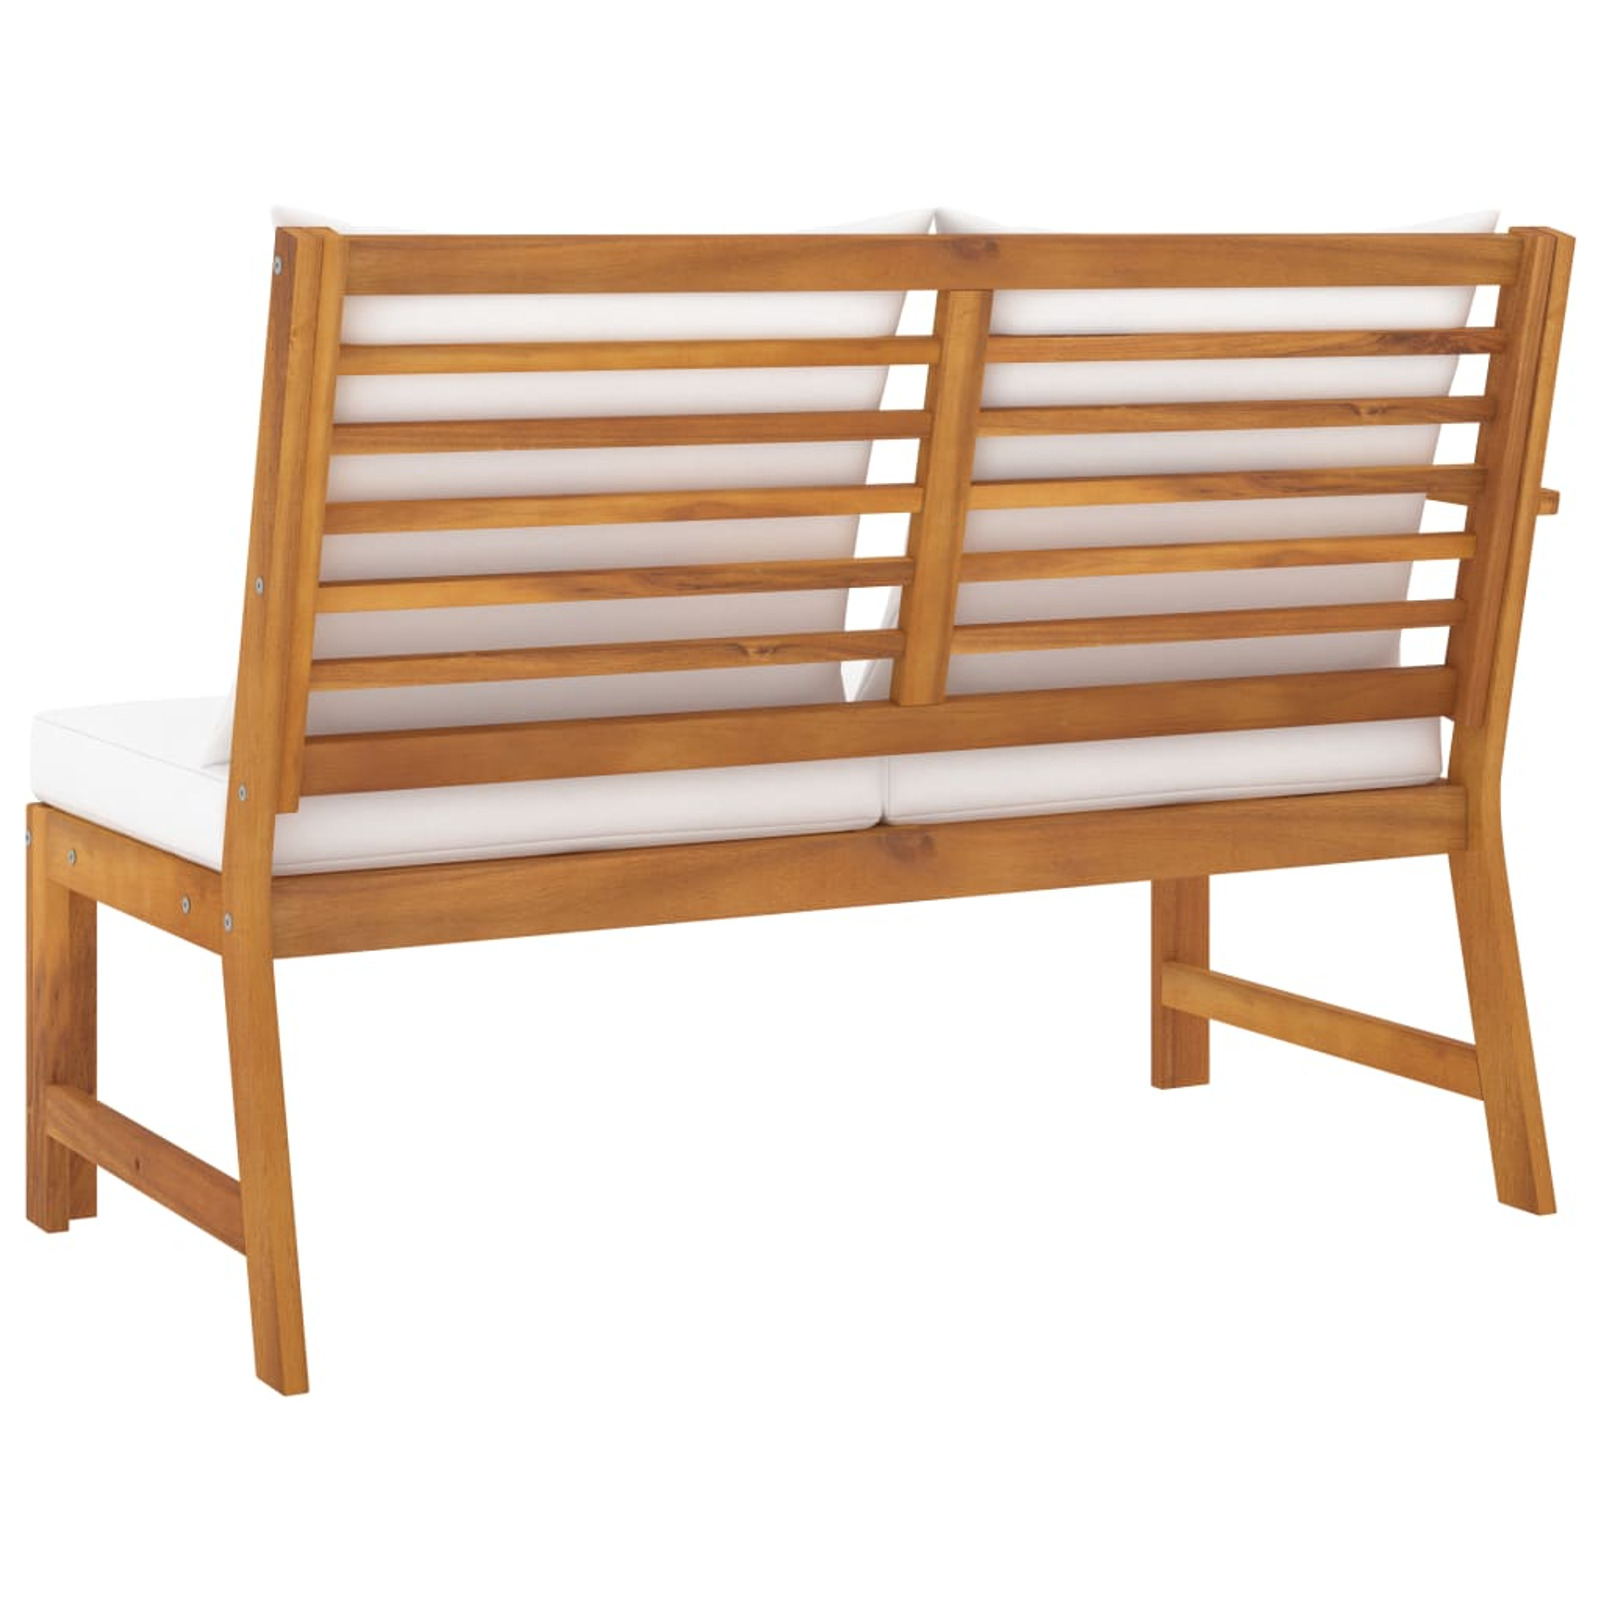 Carevas Patio Bench 45.1" with Cushion Solid Acacia Wood - image 4 of 6